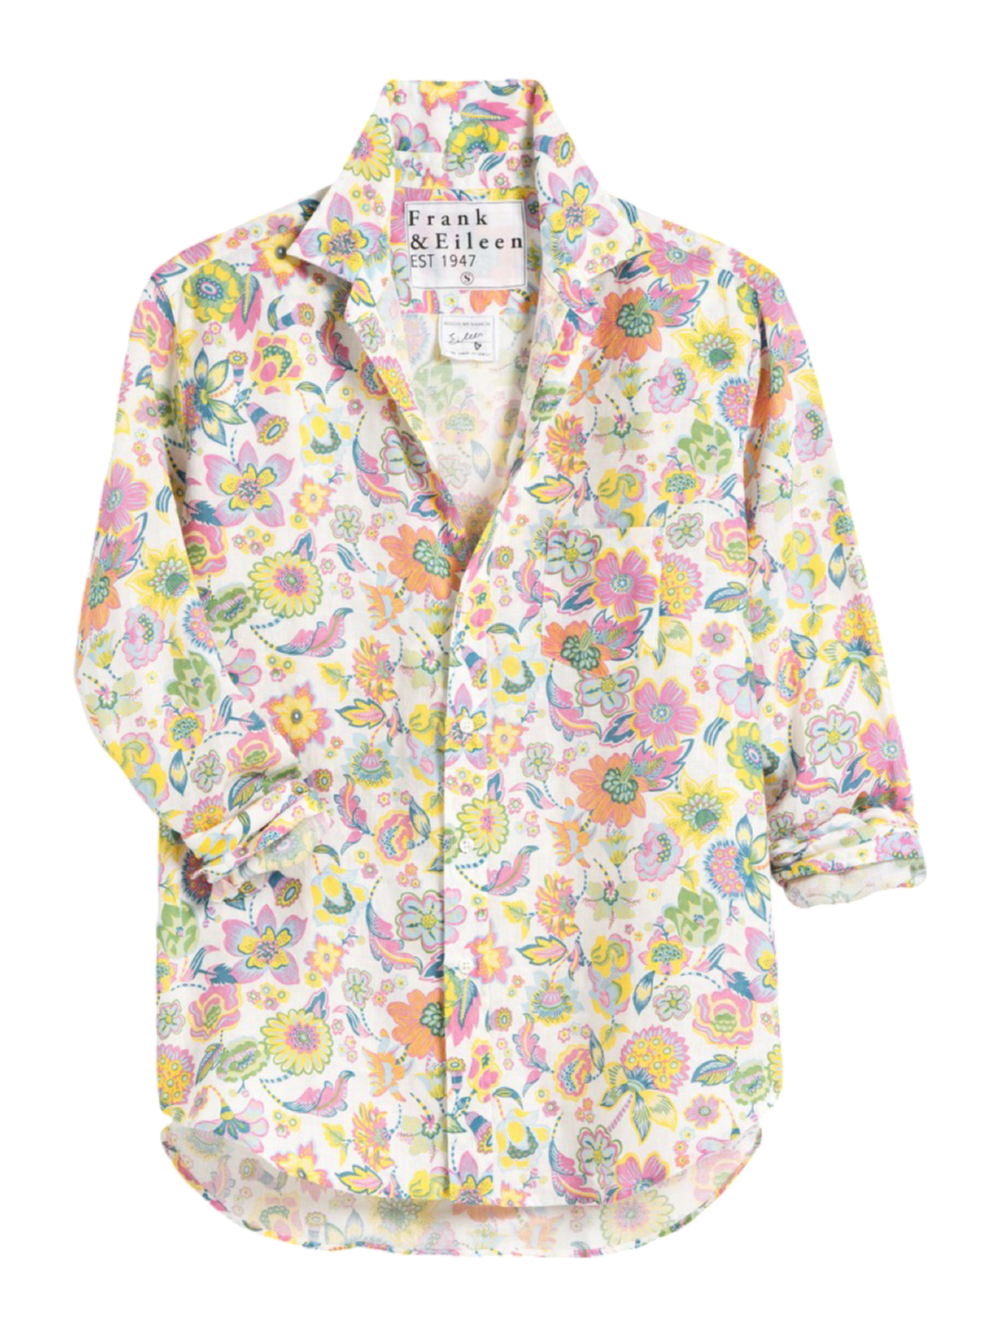 Frank & Eileen Relaxed Button-up Shirt (More Colors)